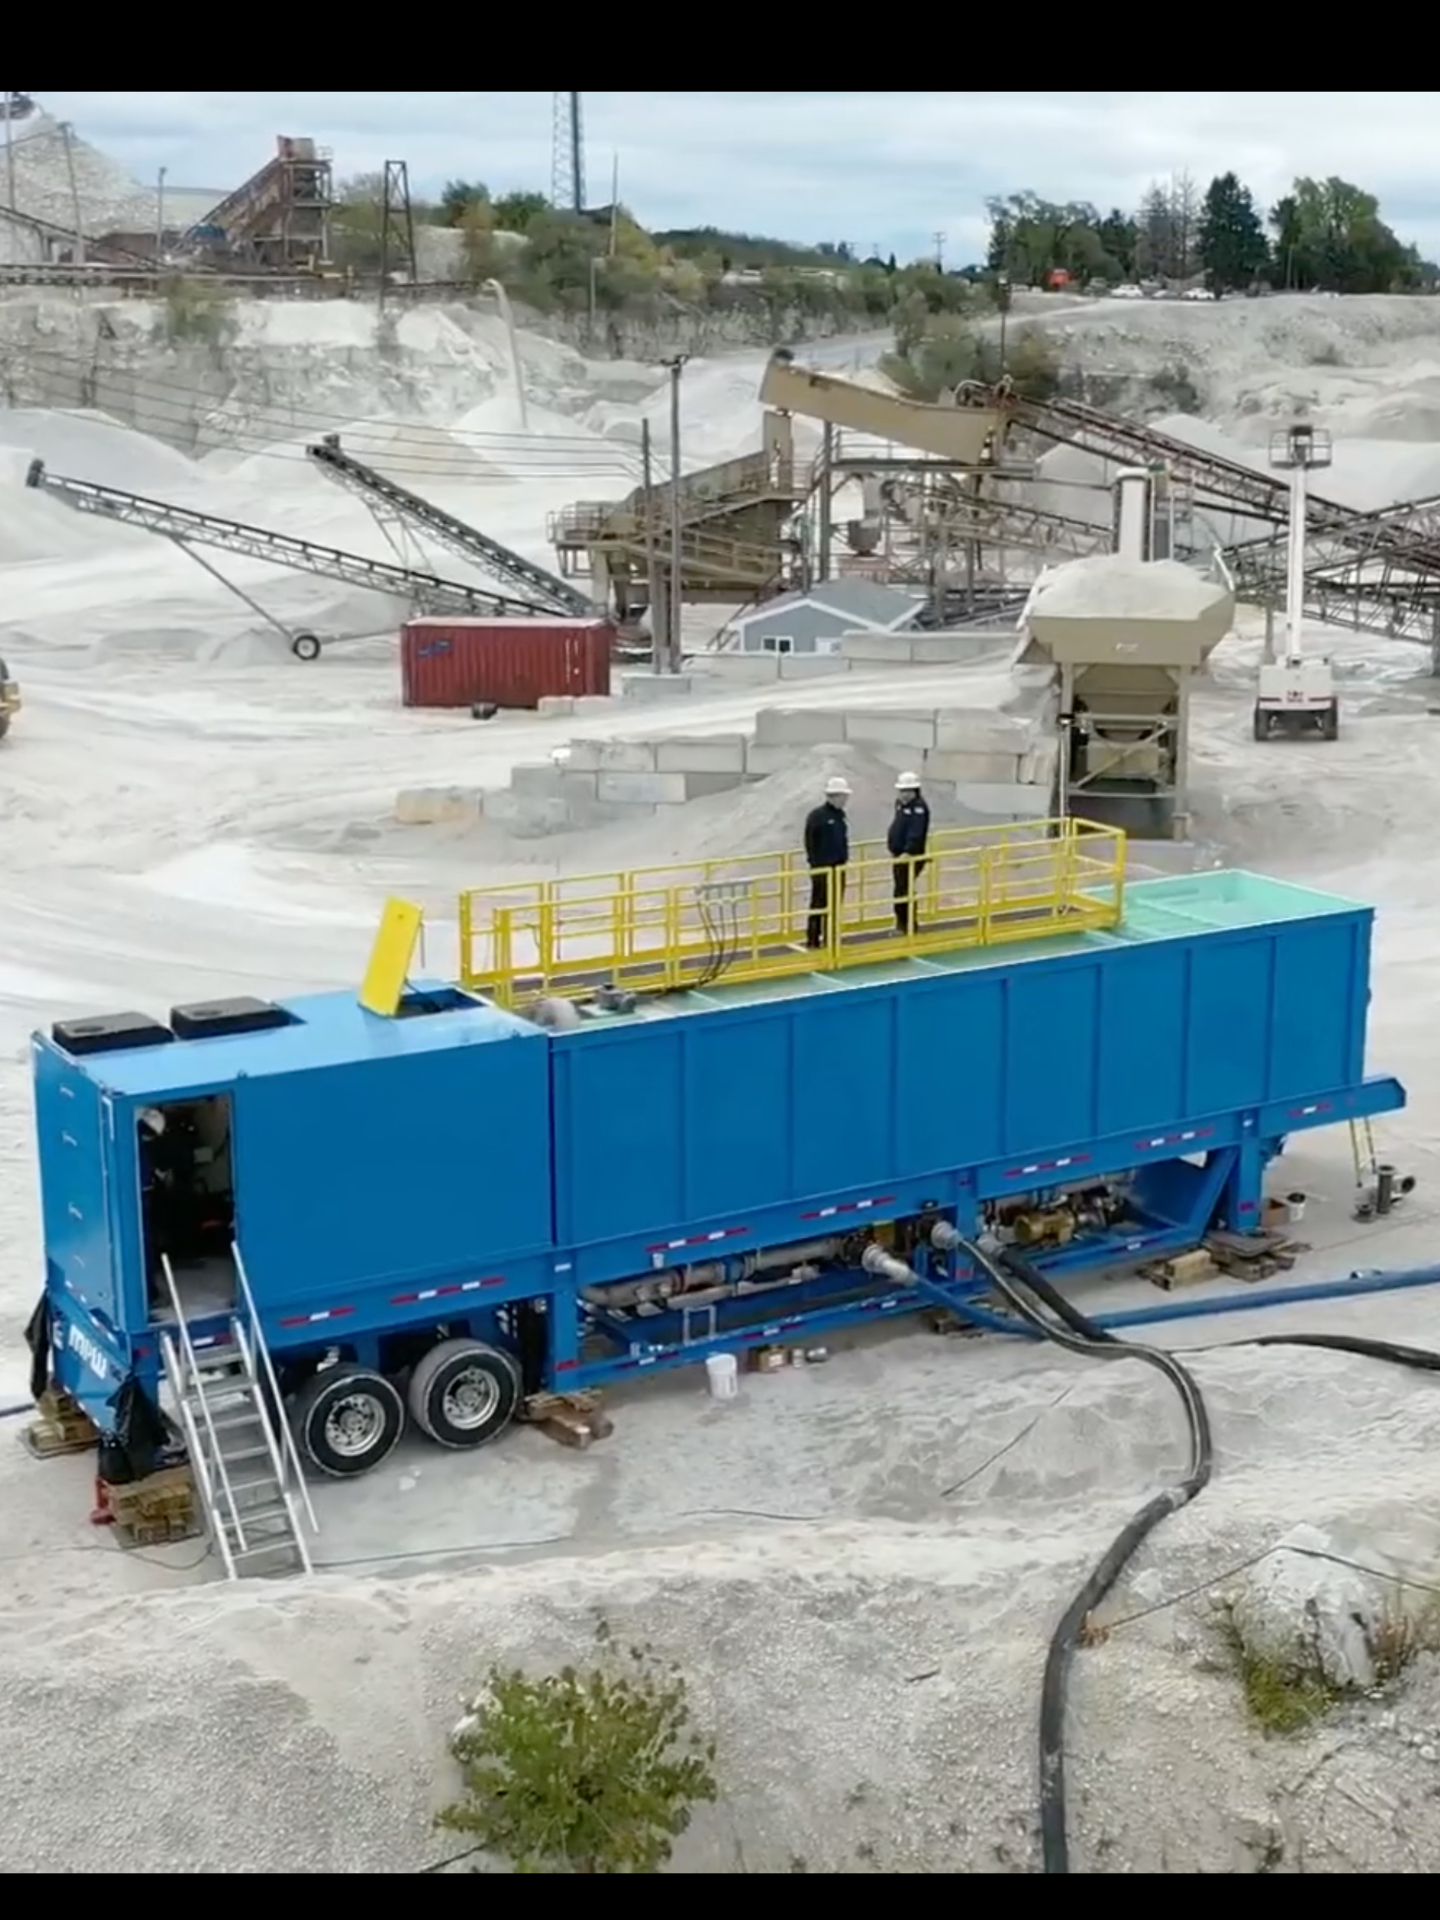 A rectangular portable industrial water clarifier setup at a quarry with two men standing on top of it.